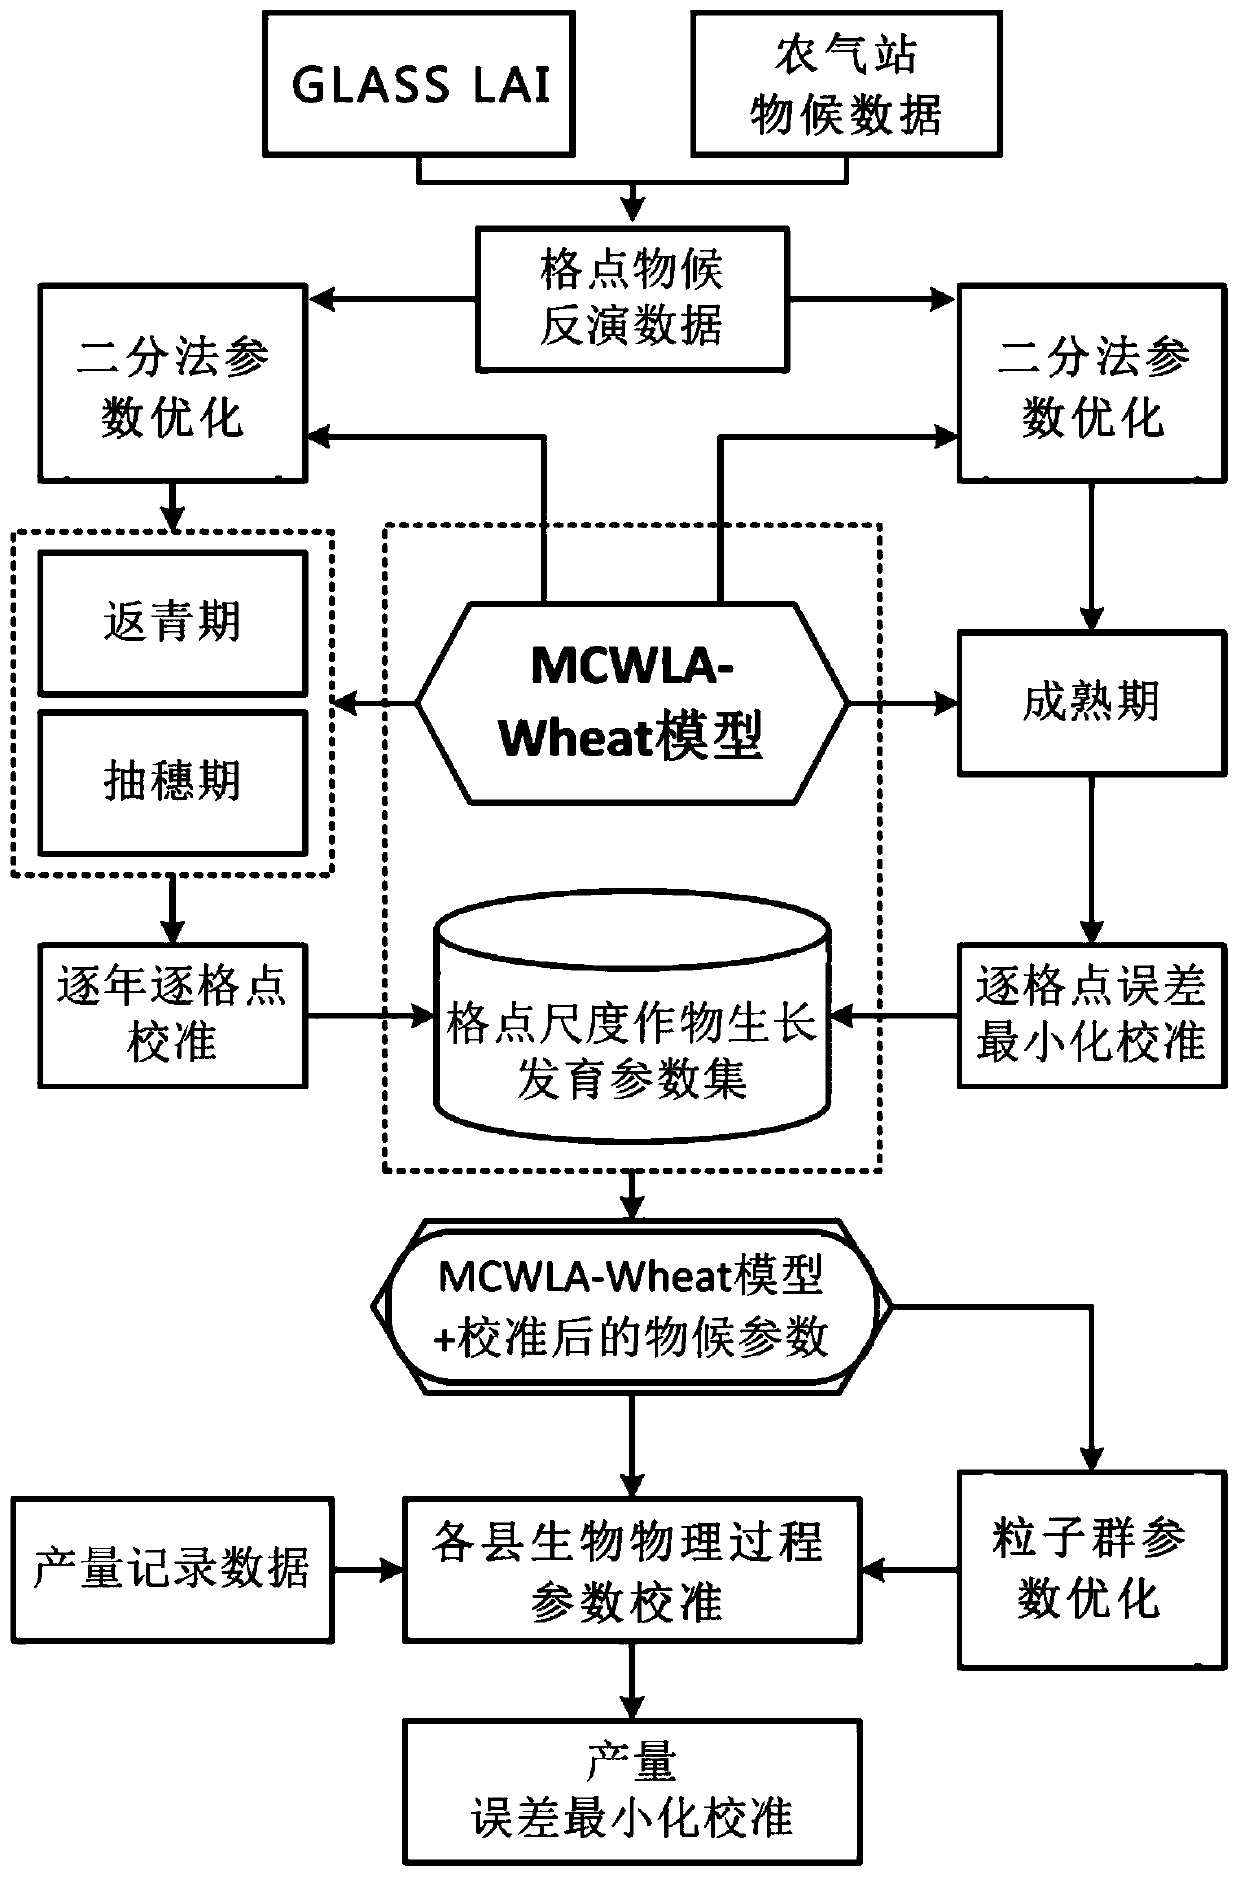 Regional winter wheat yield assessment method based on remote sensing phenology assimilation and a particle swarm optimization algorithm